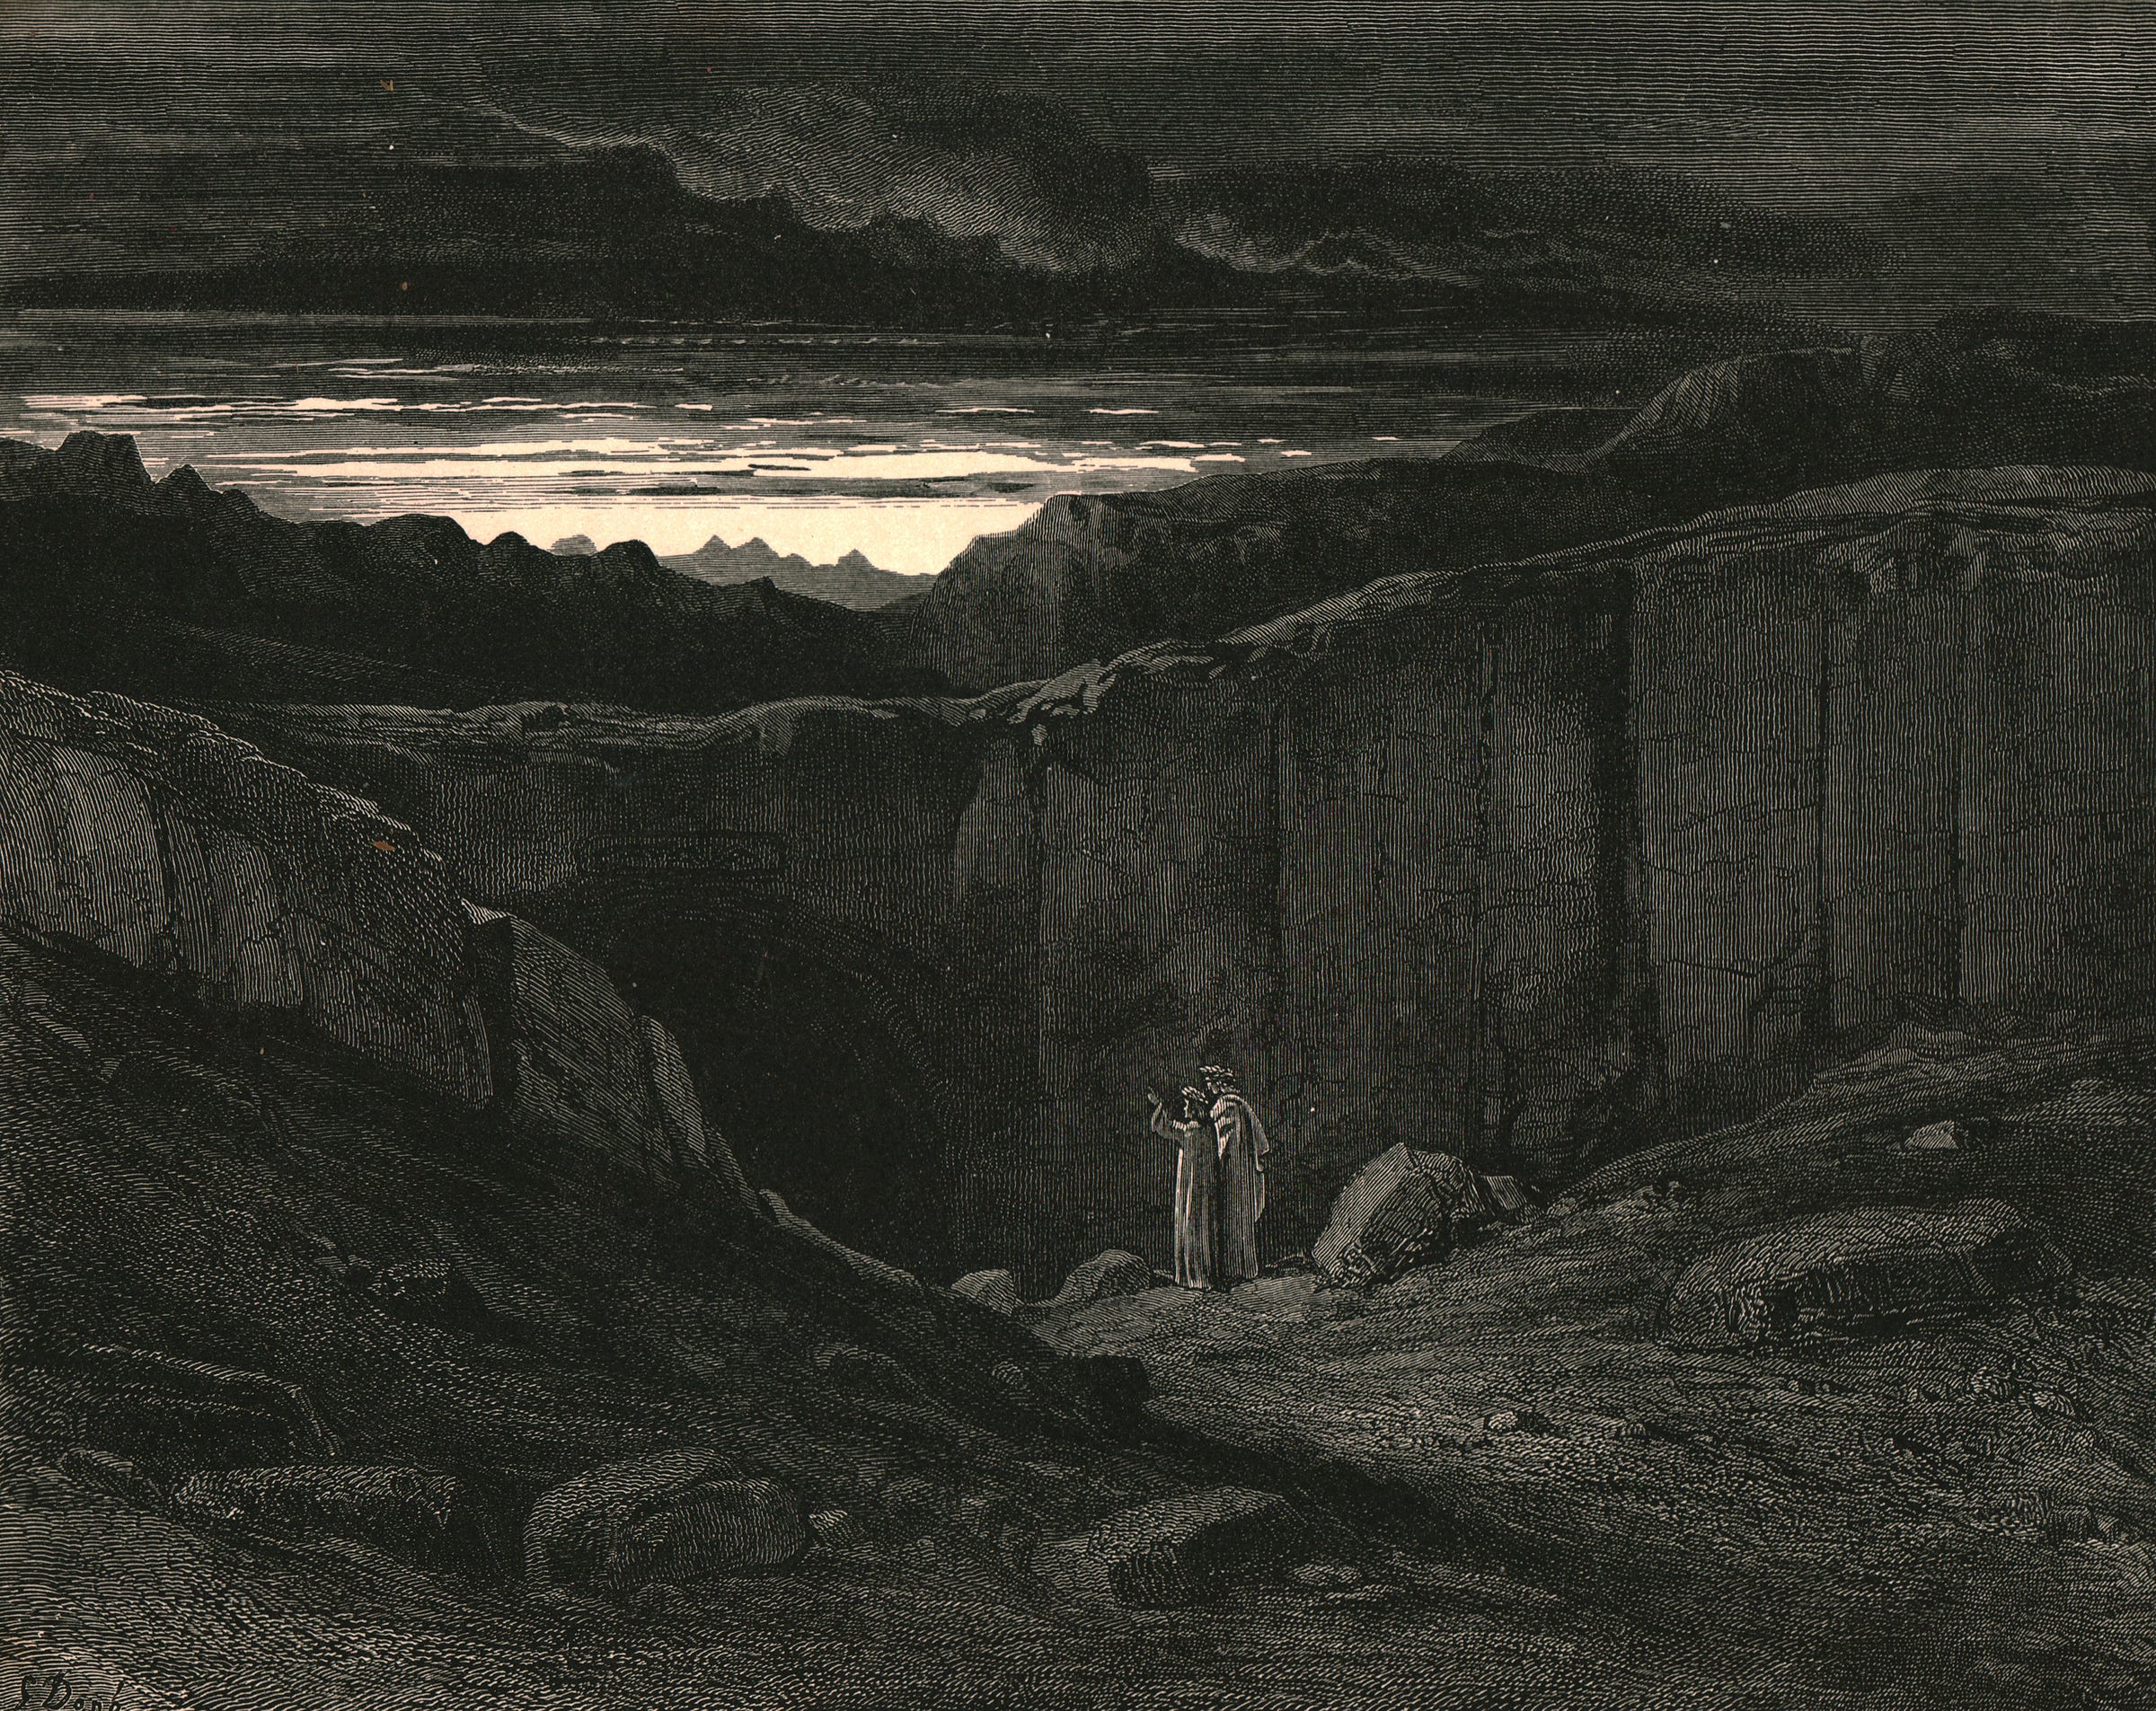  Illustration from Inferno, the first part of “The Divine Comedy” by Dante Alighieri. Artist Gustave Doré. Photo by The Print Collector via Getty Images.